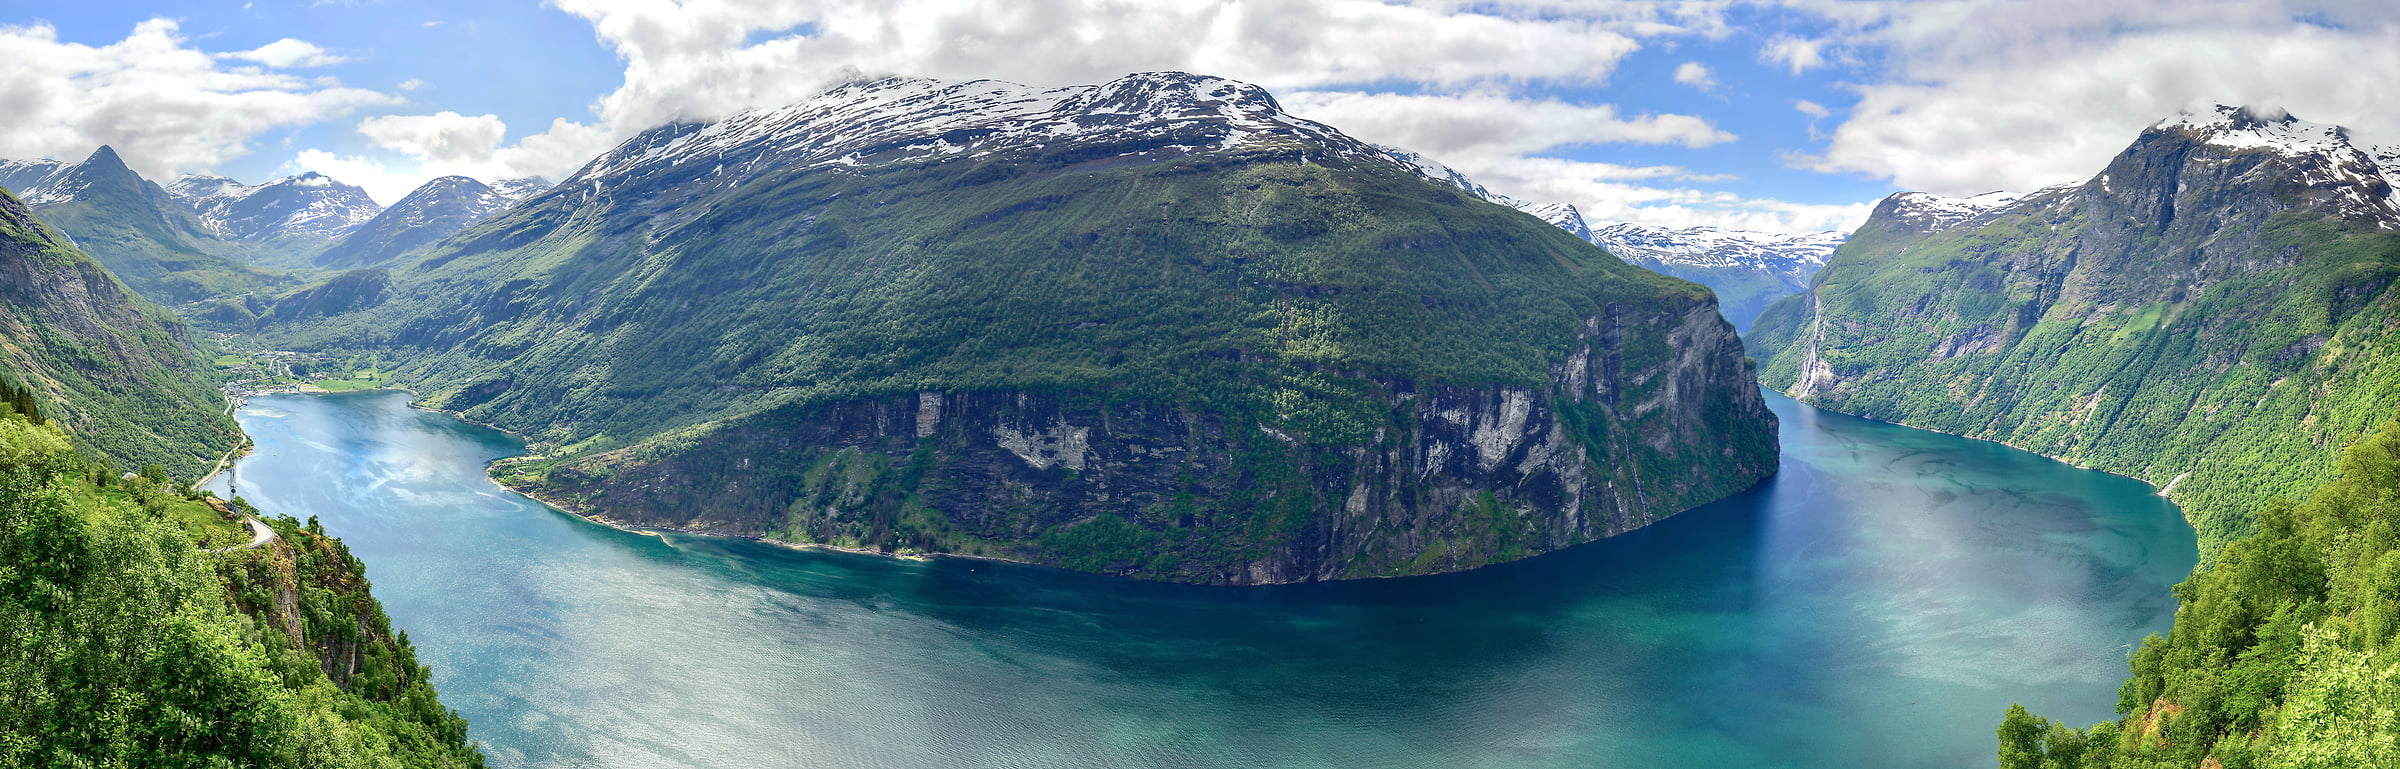 386 megapixels! A very high quality, large-format landscape photo of the fjords and mountains in Norway; VAST photo print created by Justin Katz.